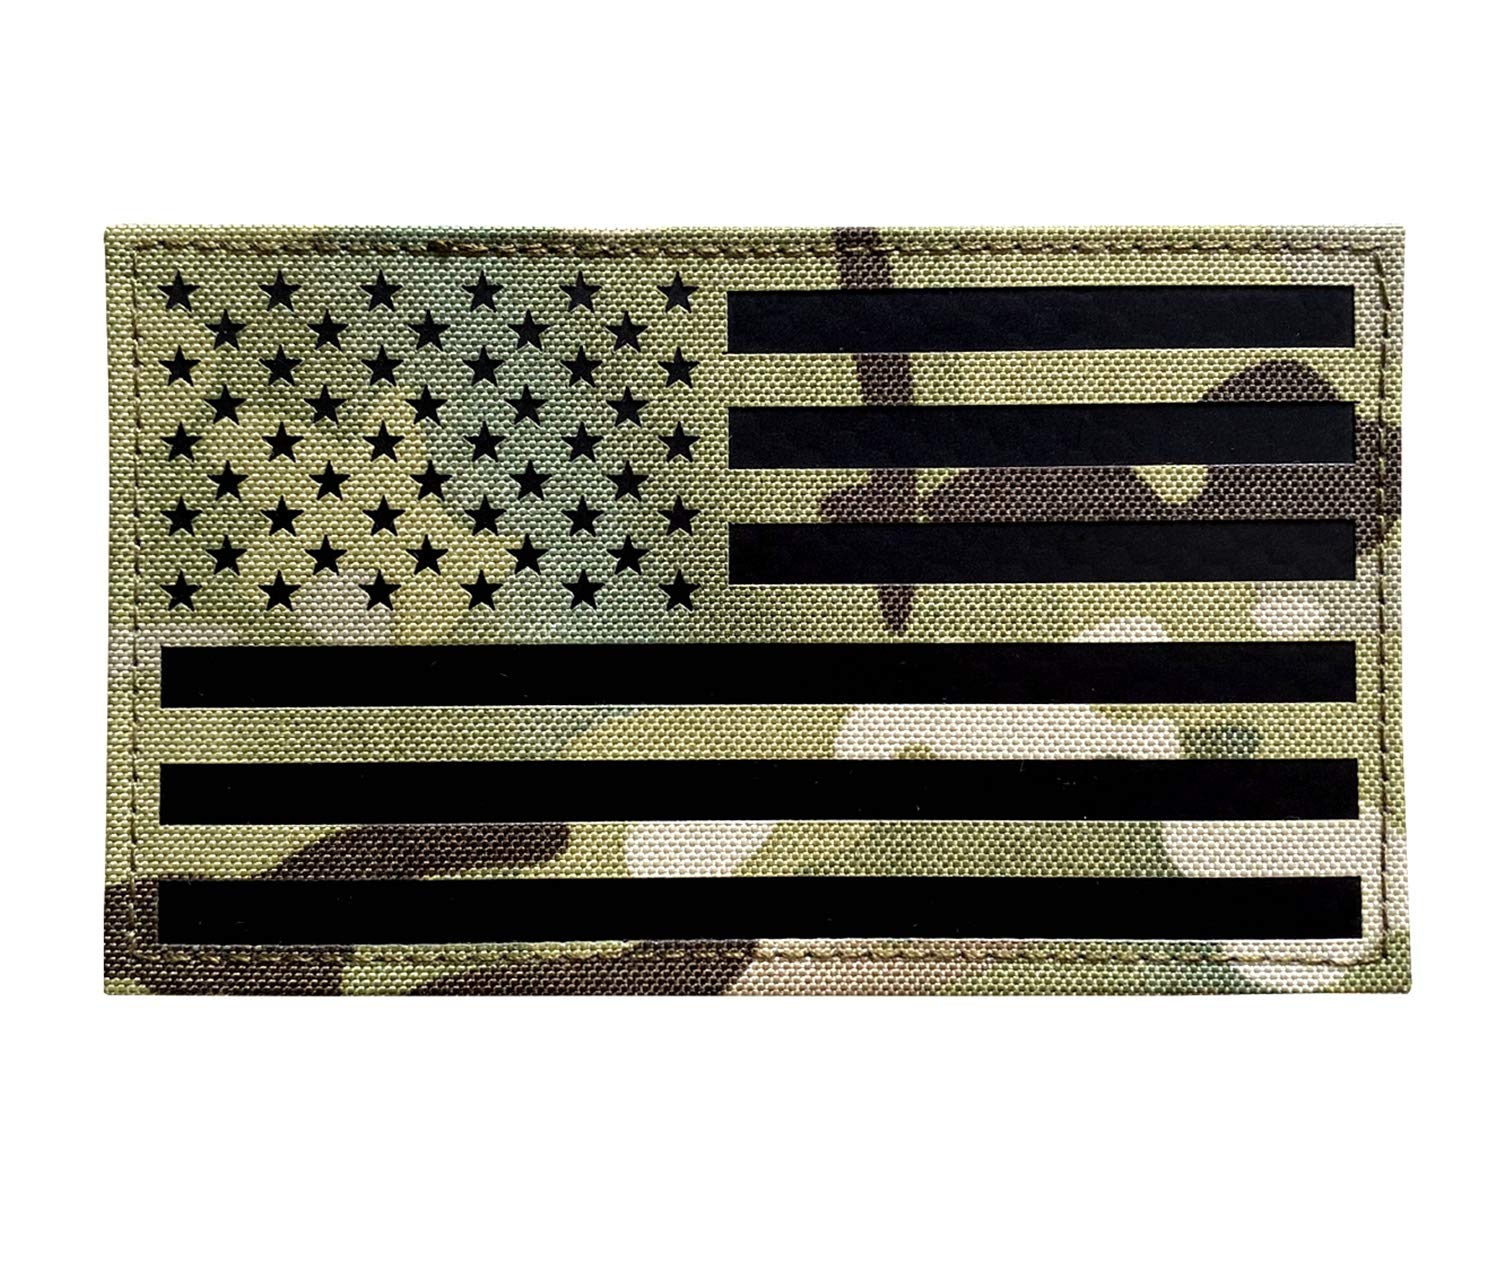 5x3 inch Large Infrared IR US USA American Flag Patch Tactical